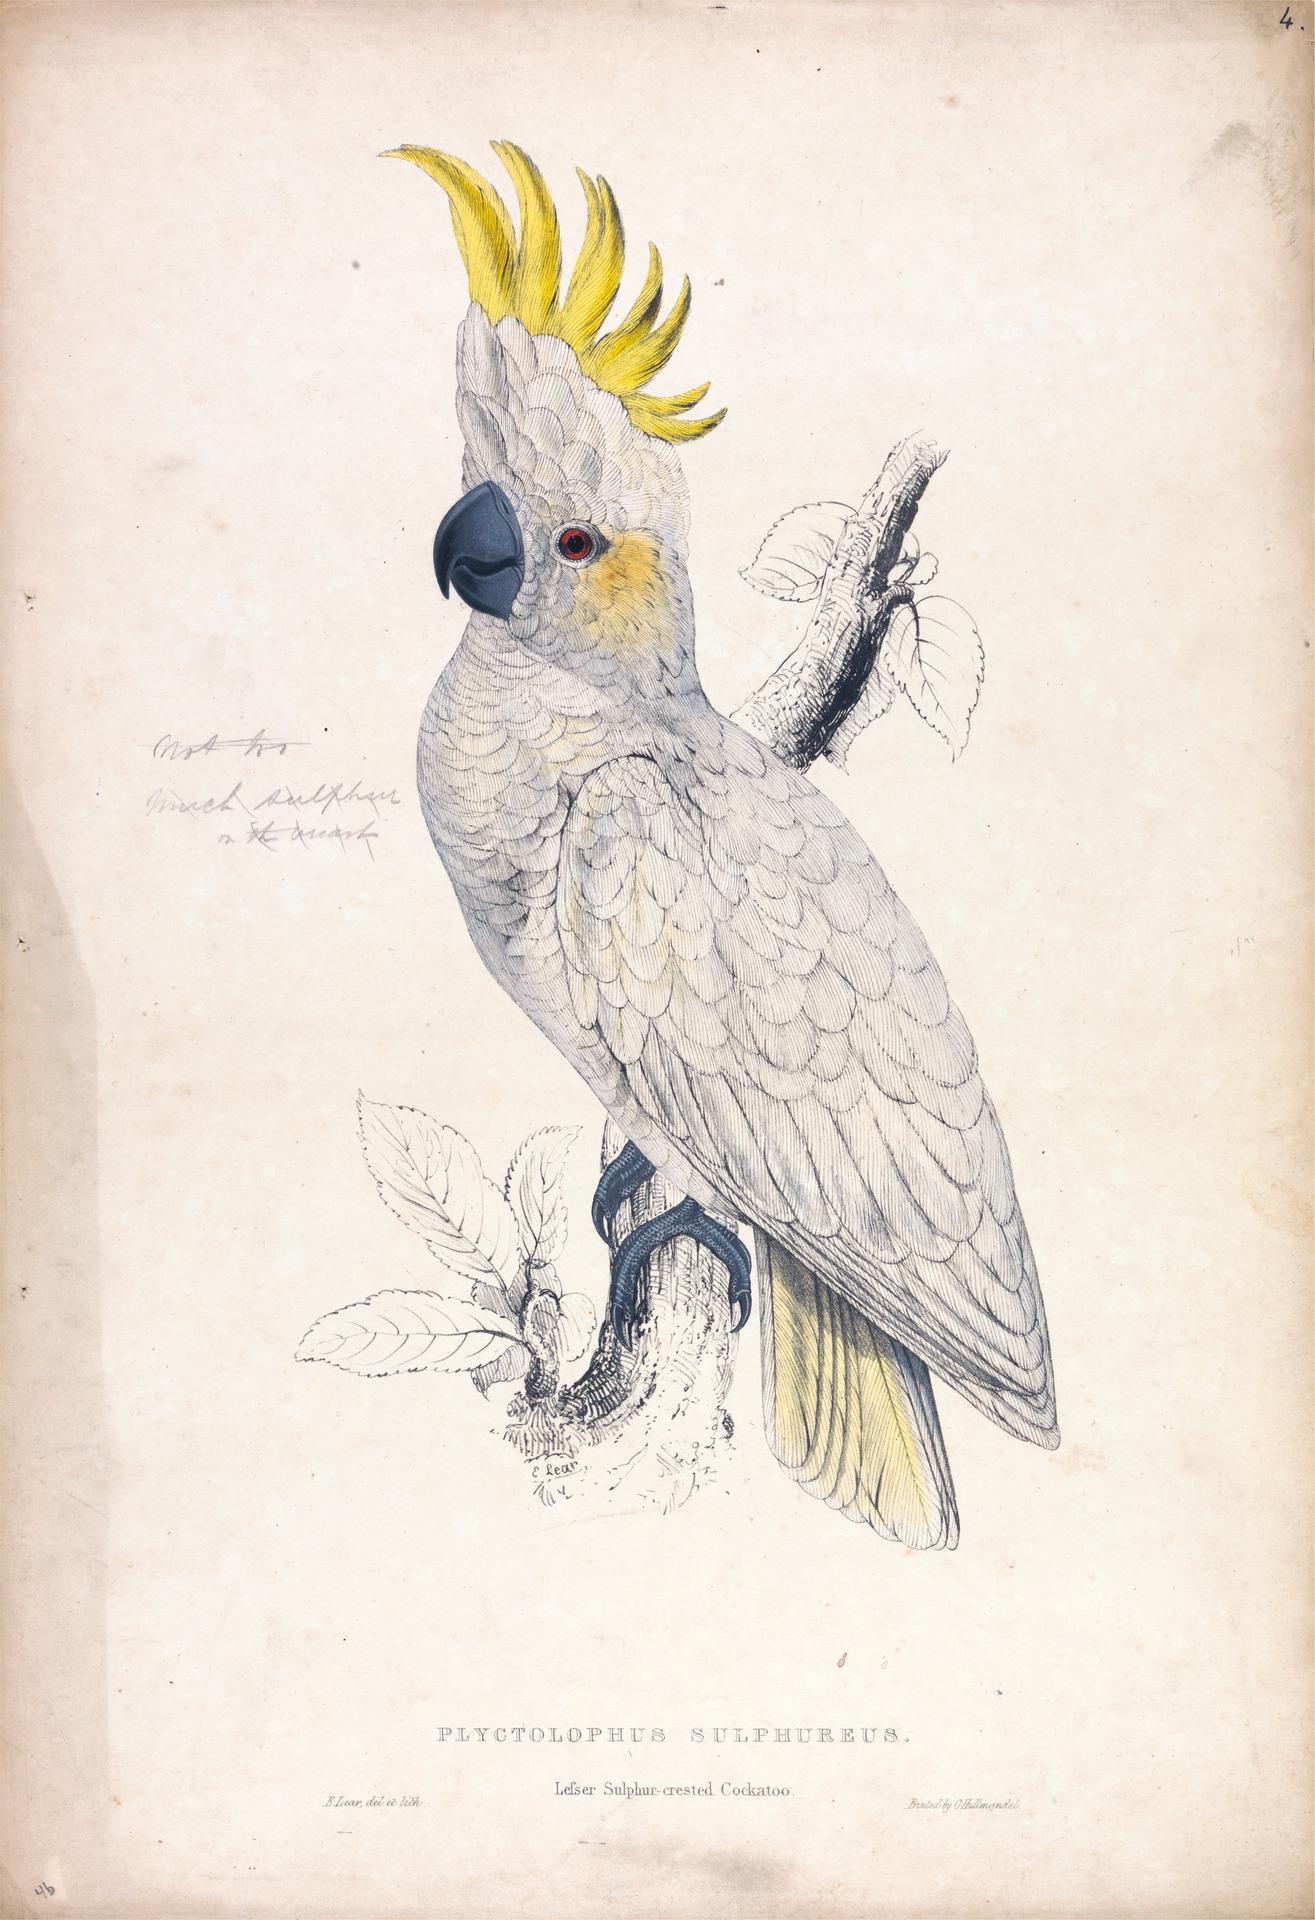 An illustration of a cockatoo